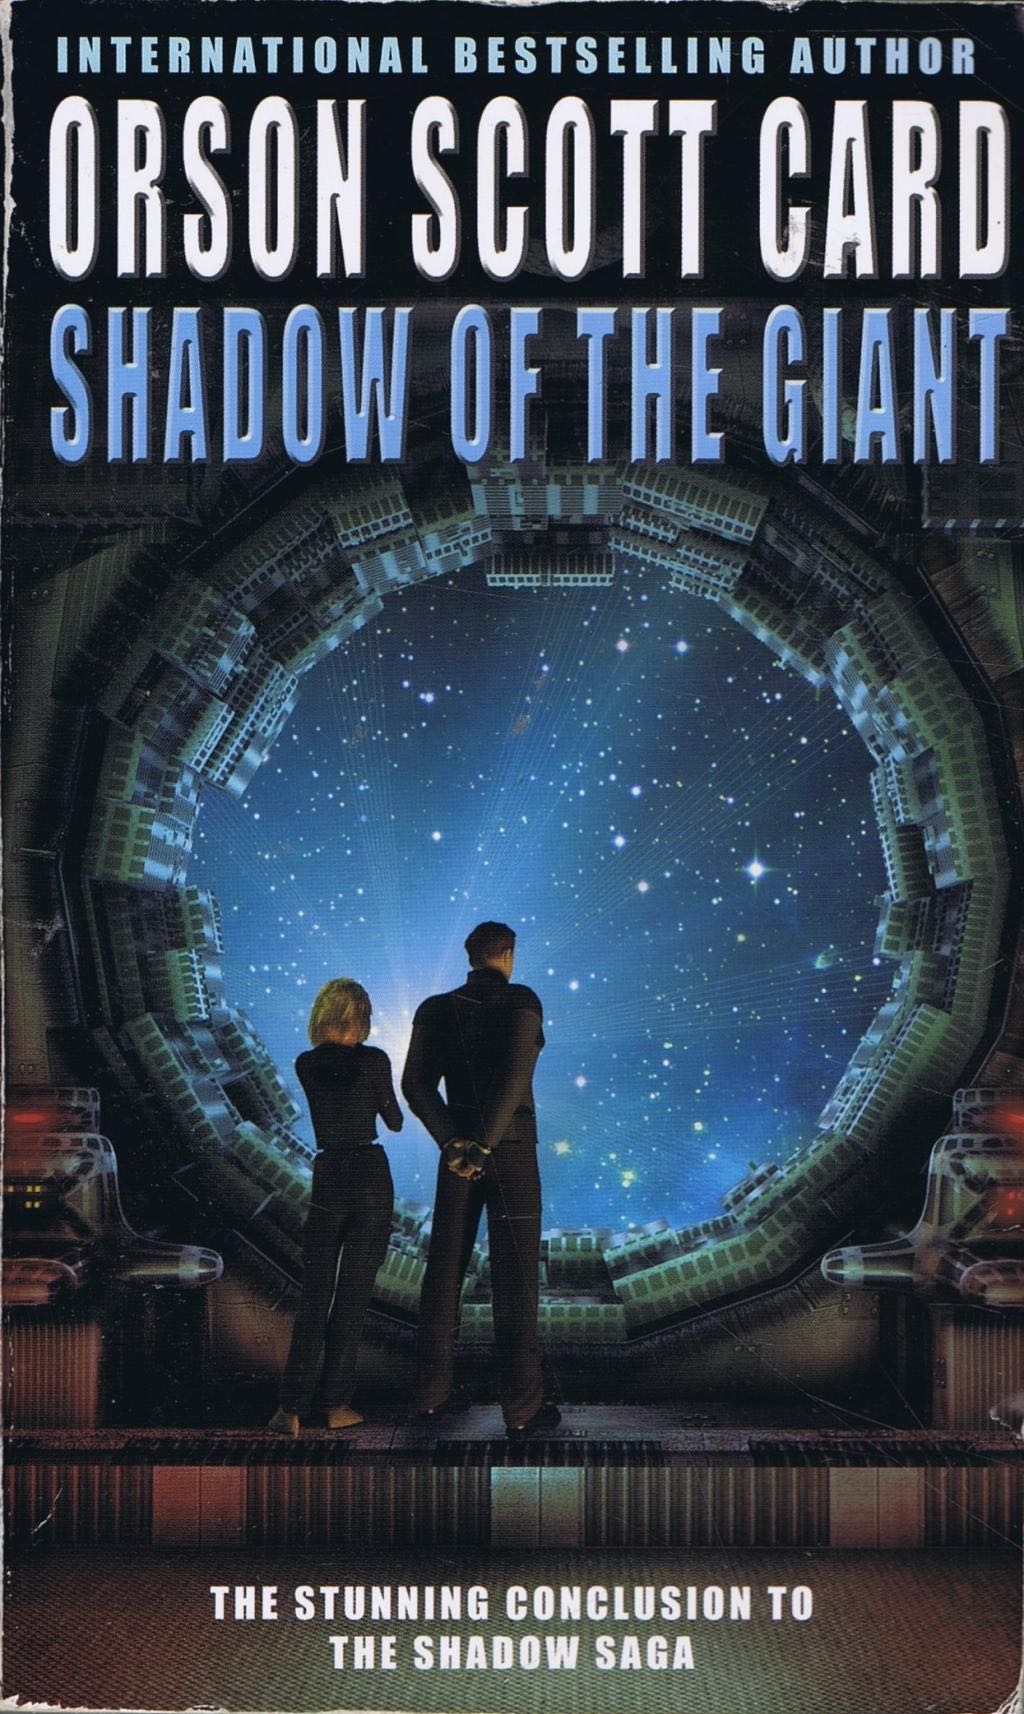 Shadow of the Giant, by Orson Scott Card